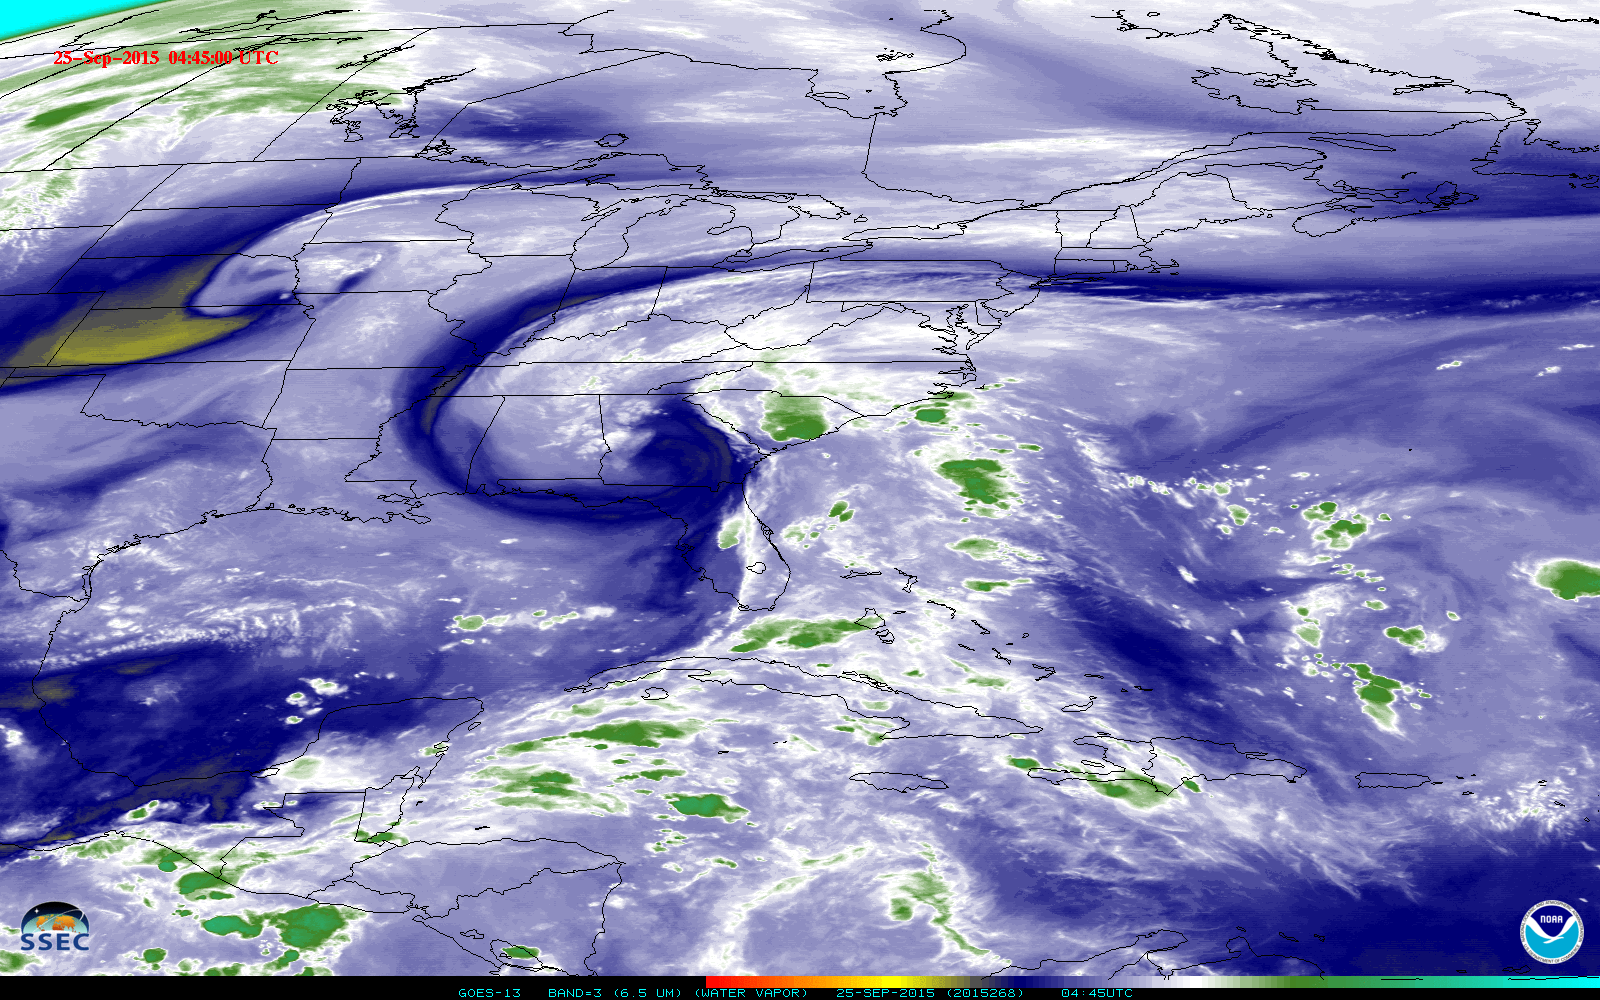 GOES-13 Infrared Water Vapor (6.5 µm) images [click to play animation]